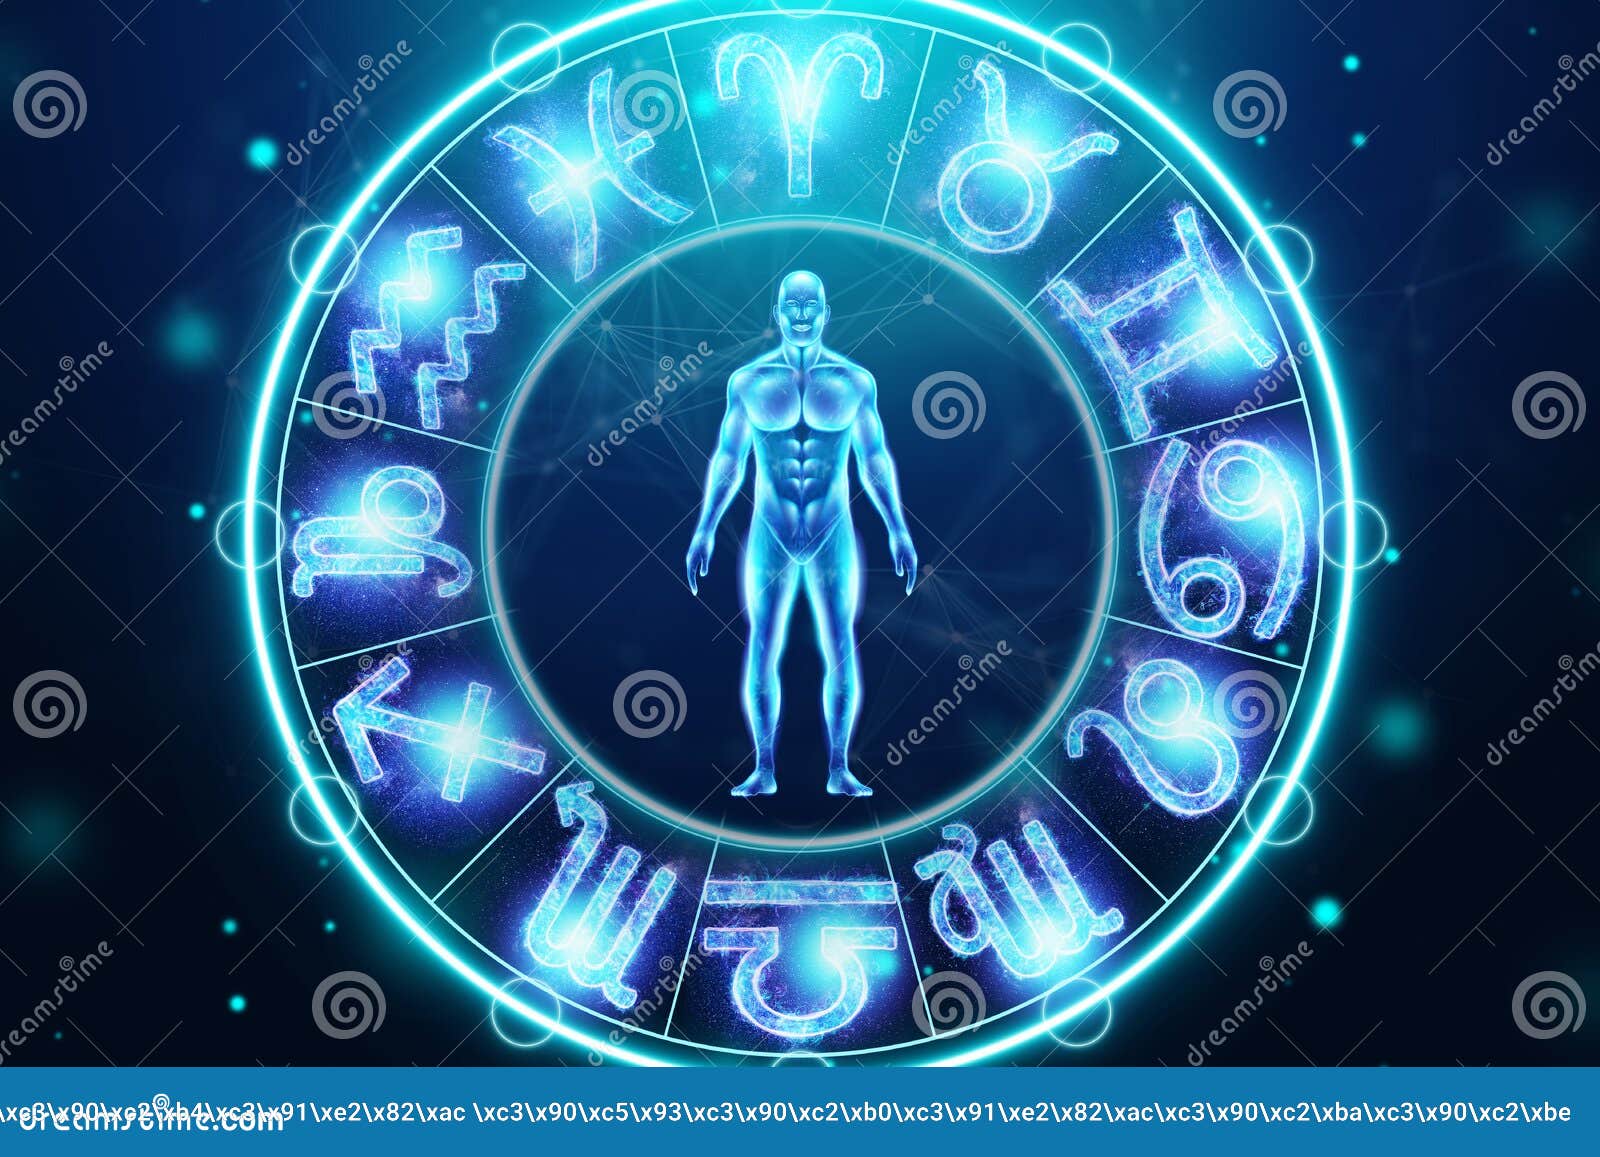 horoscope-concept-man-background-circle-signs-zodiac-astrology-consulting-stars-d-horoscope-231774594.jpg